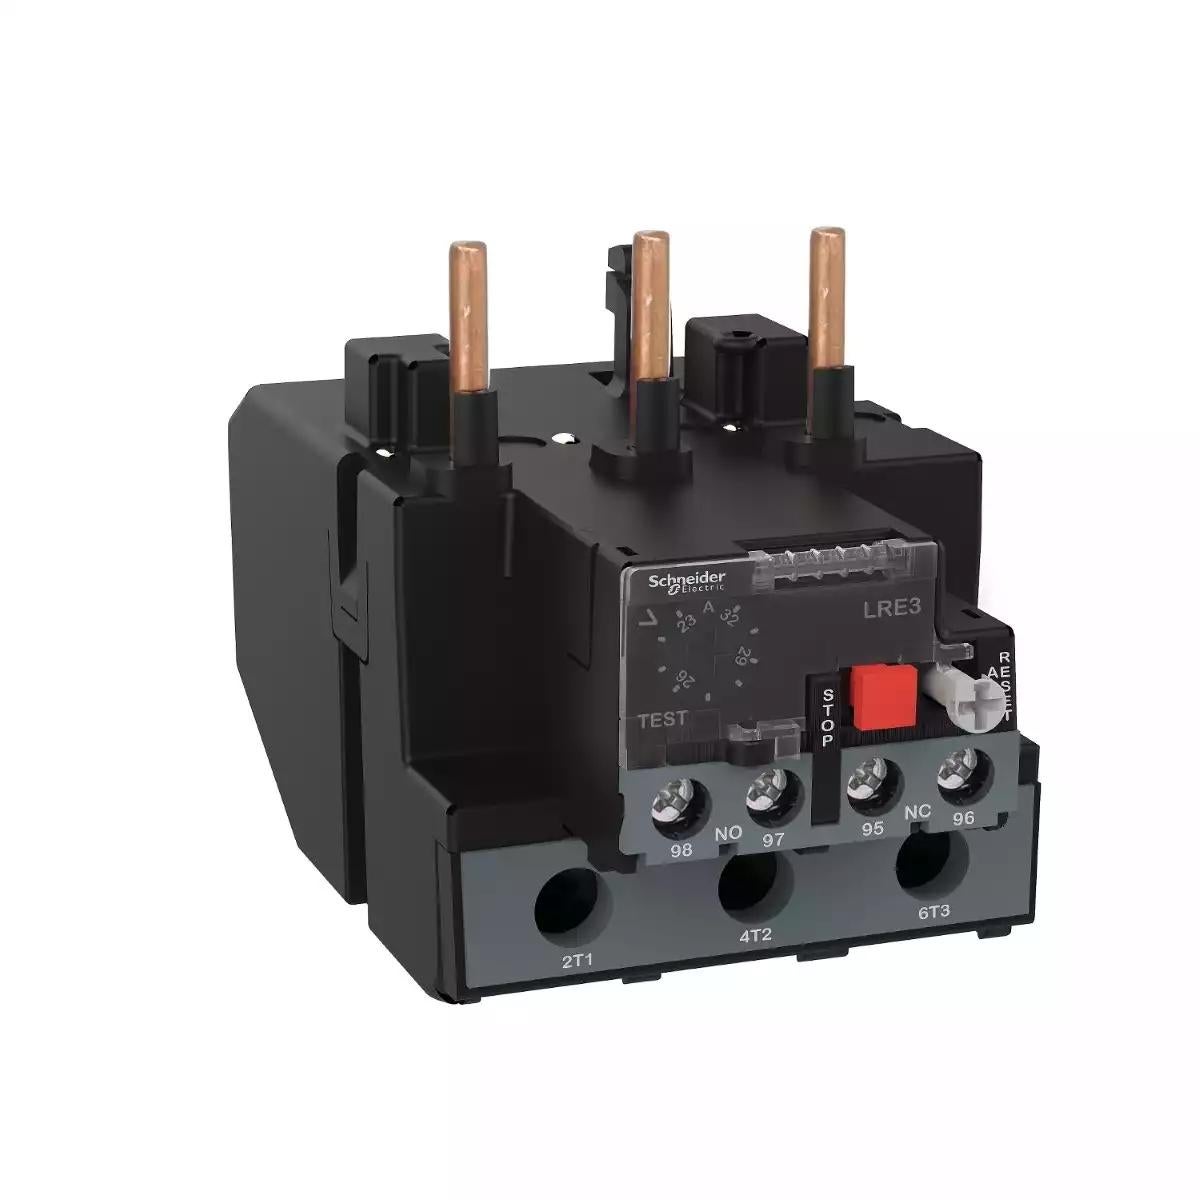 TVS THERMAL OVERLOAD RELAY 48...65A